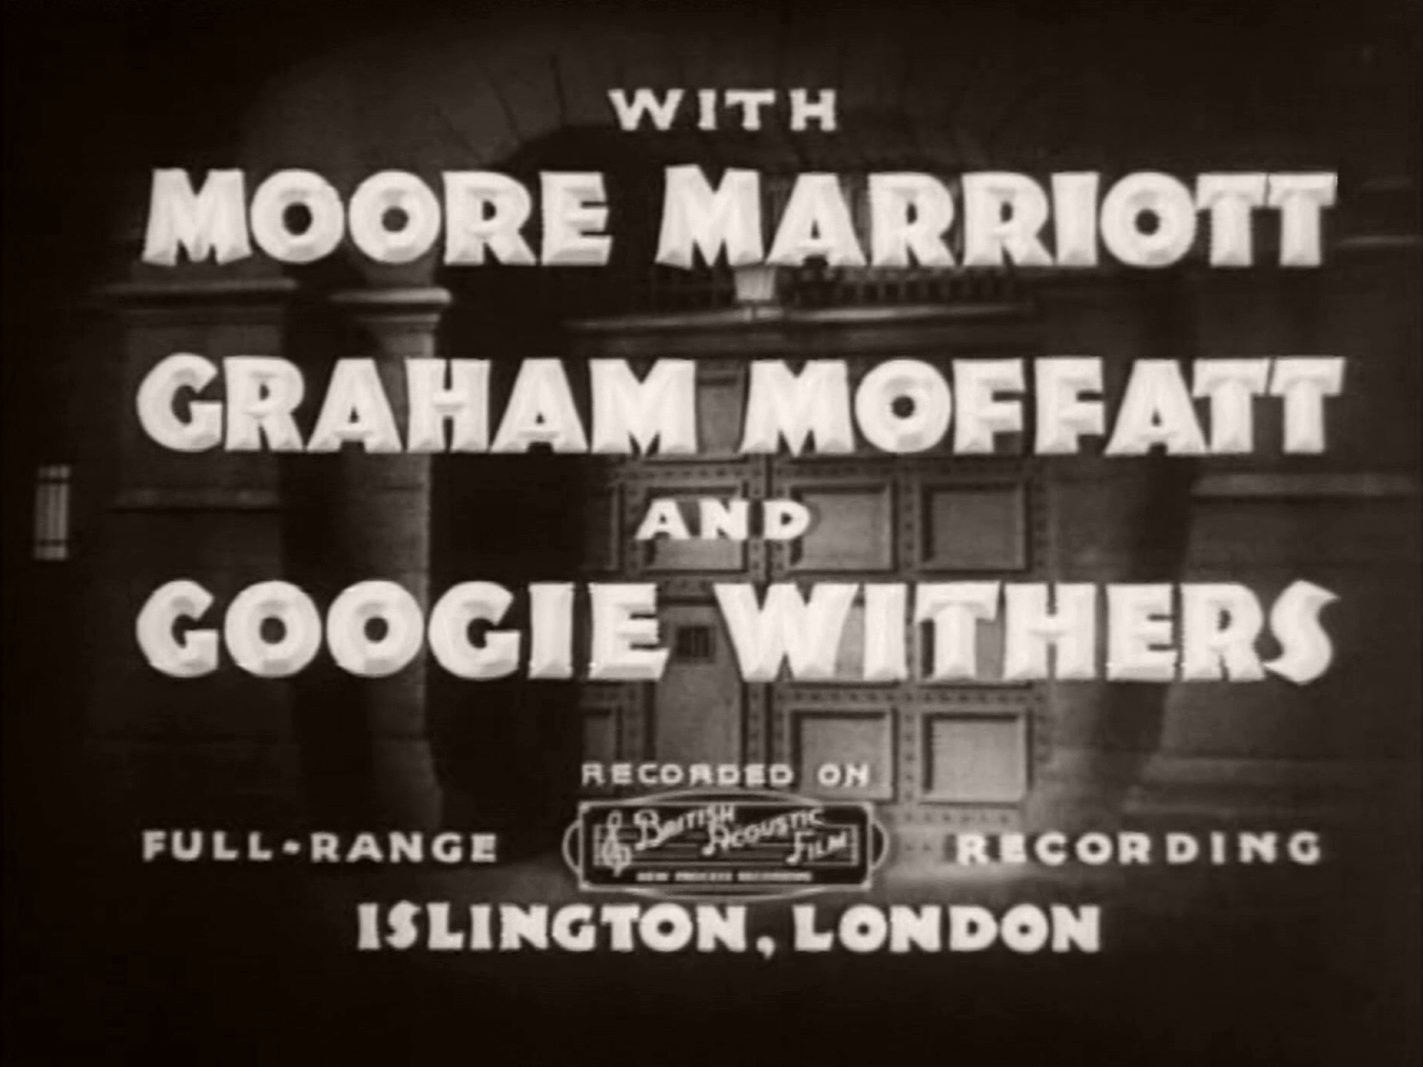 Main title from Convict 99 (1938) (3).  With Moore Marriott Graham Moffatt and Googie Withers.  Recorded on British Acoustic Film full-range  recording, Islington, London